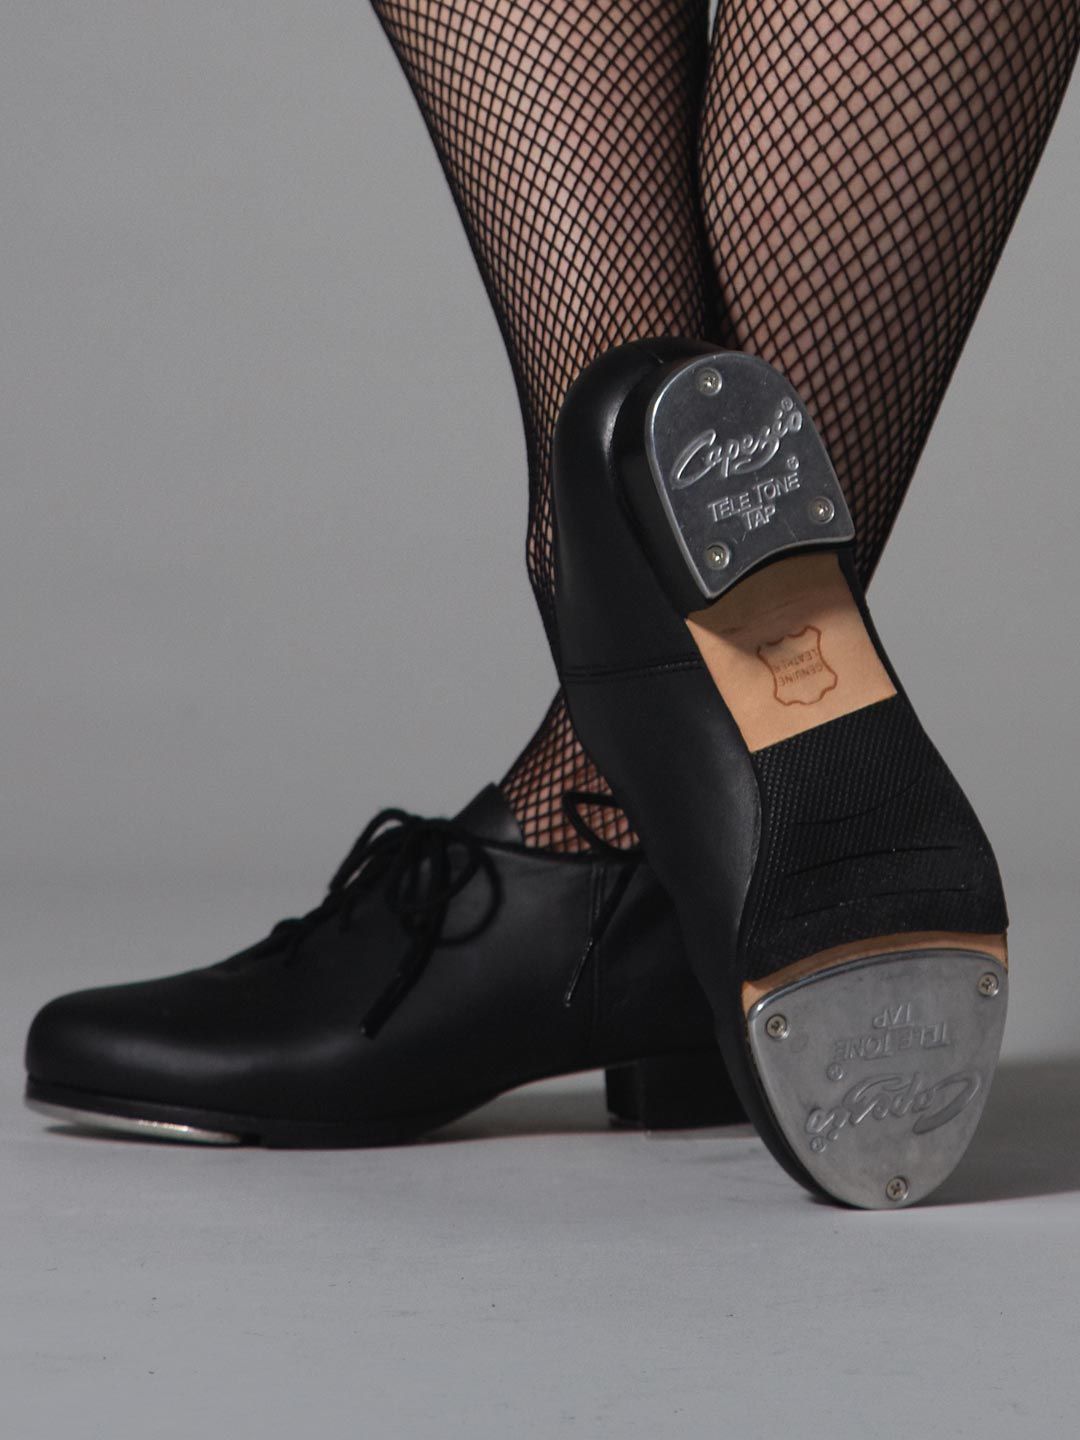 cheap adult tap shoes